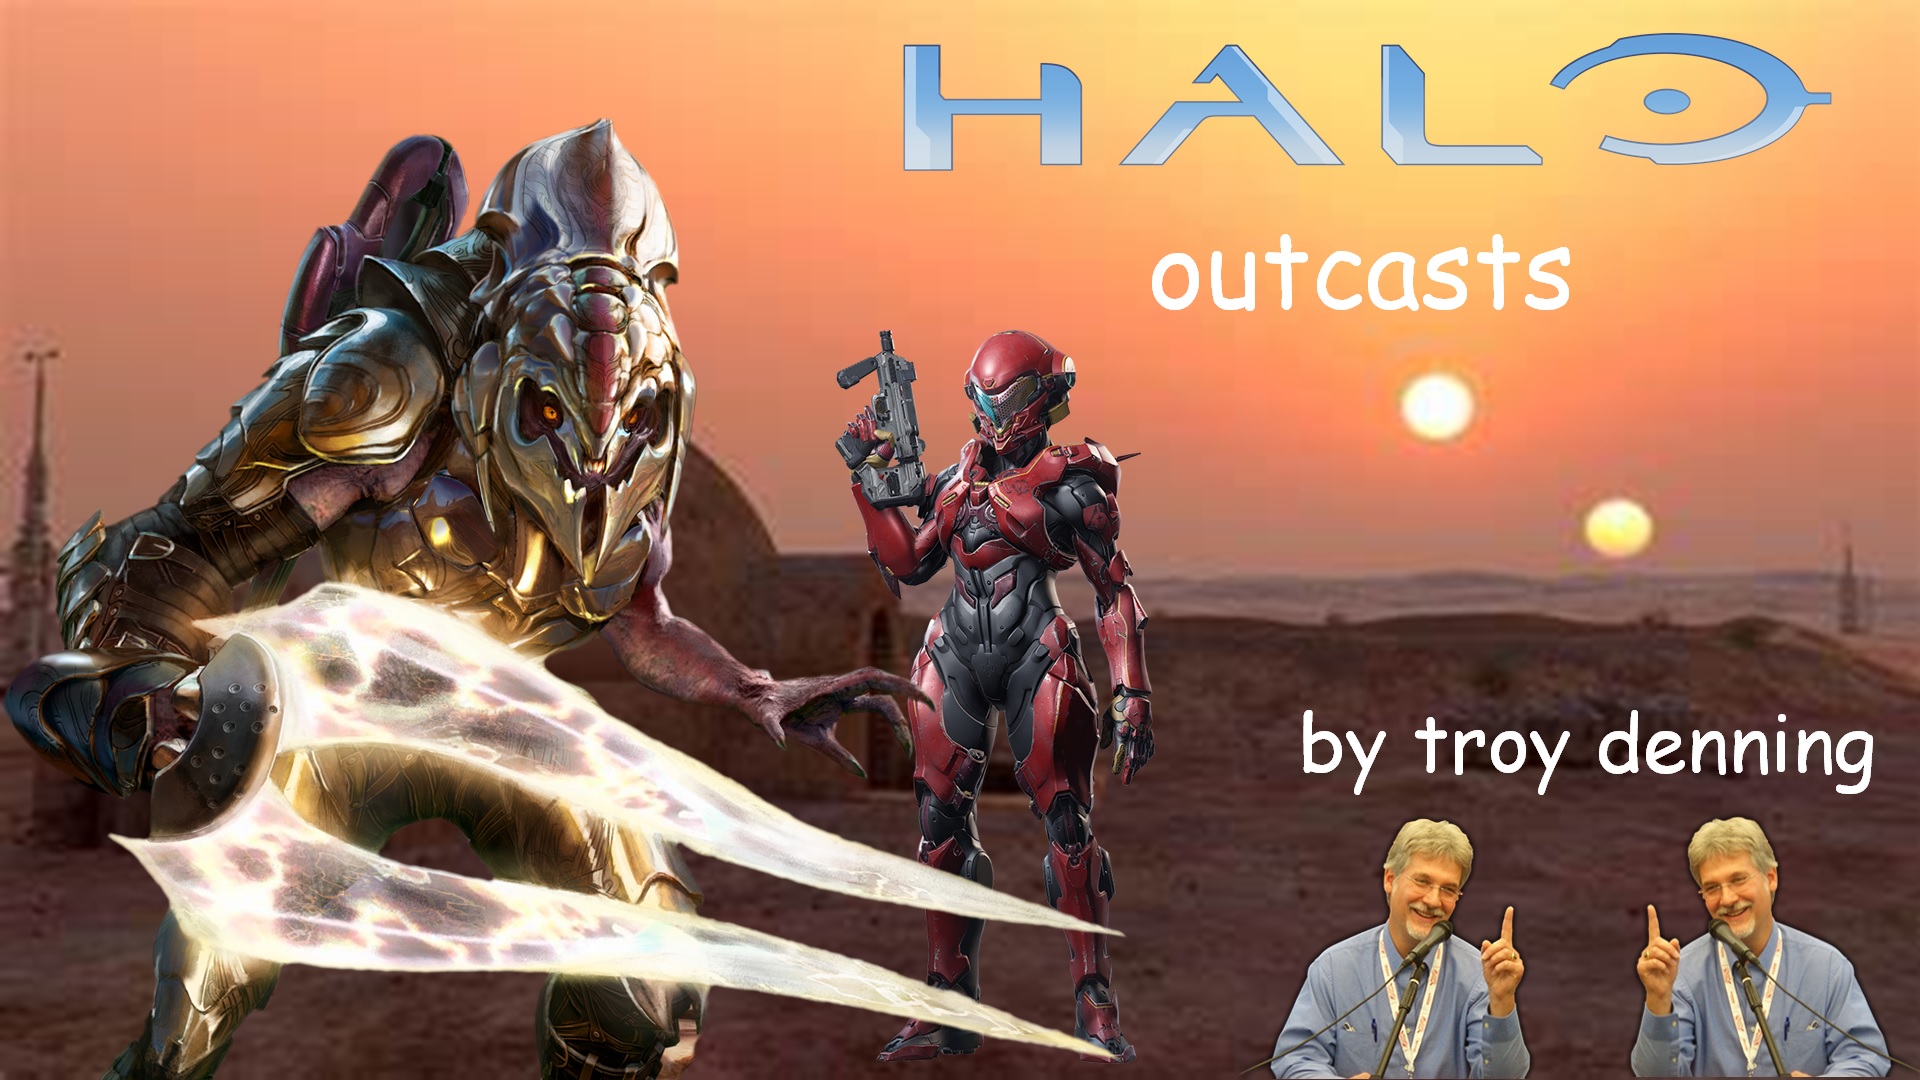 Very professional mock-up cover art of Halo: Outcasts